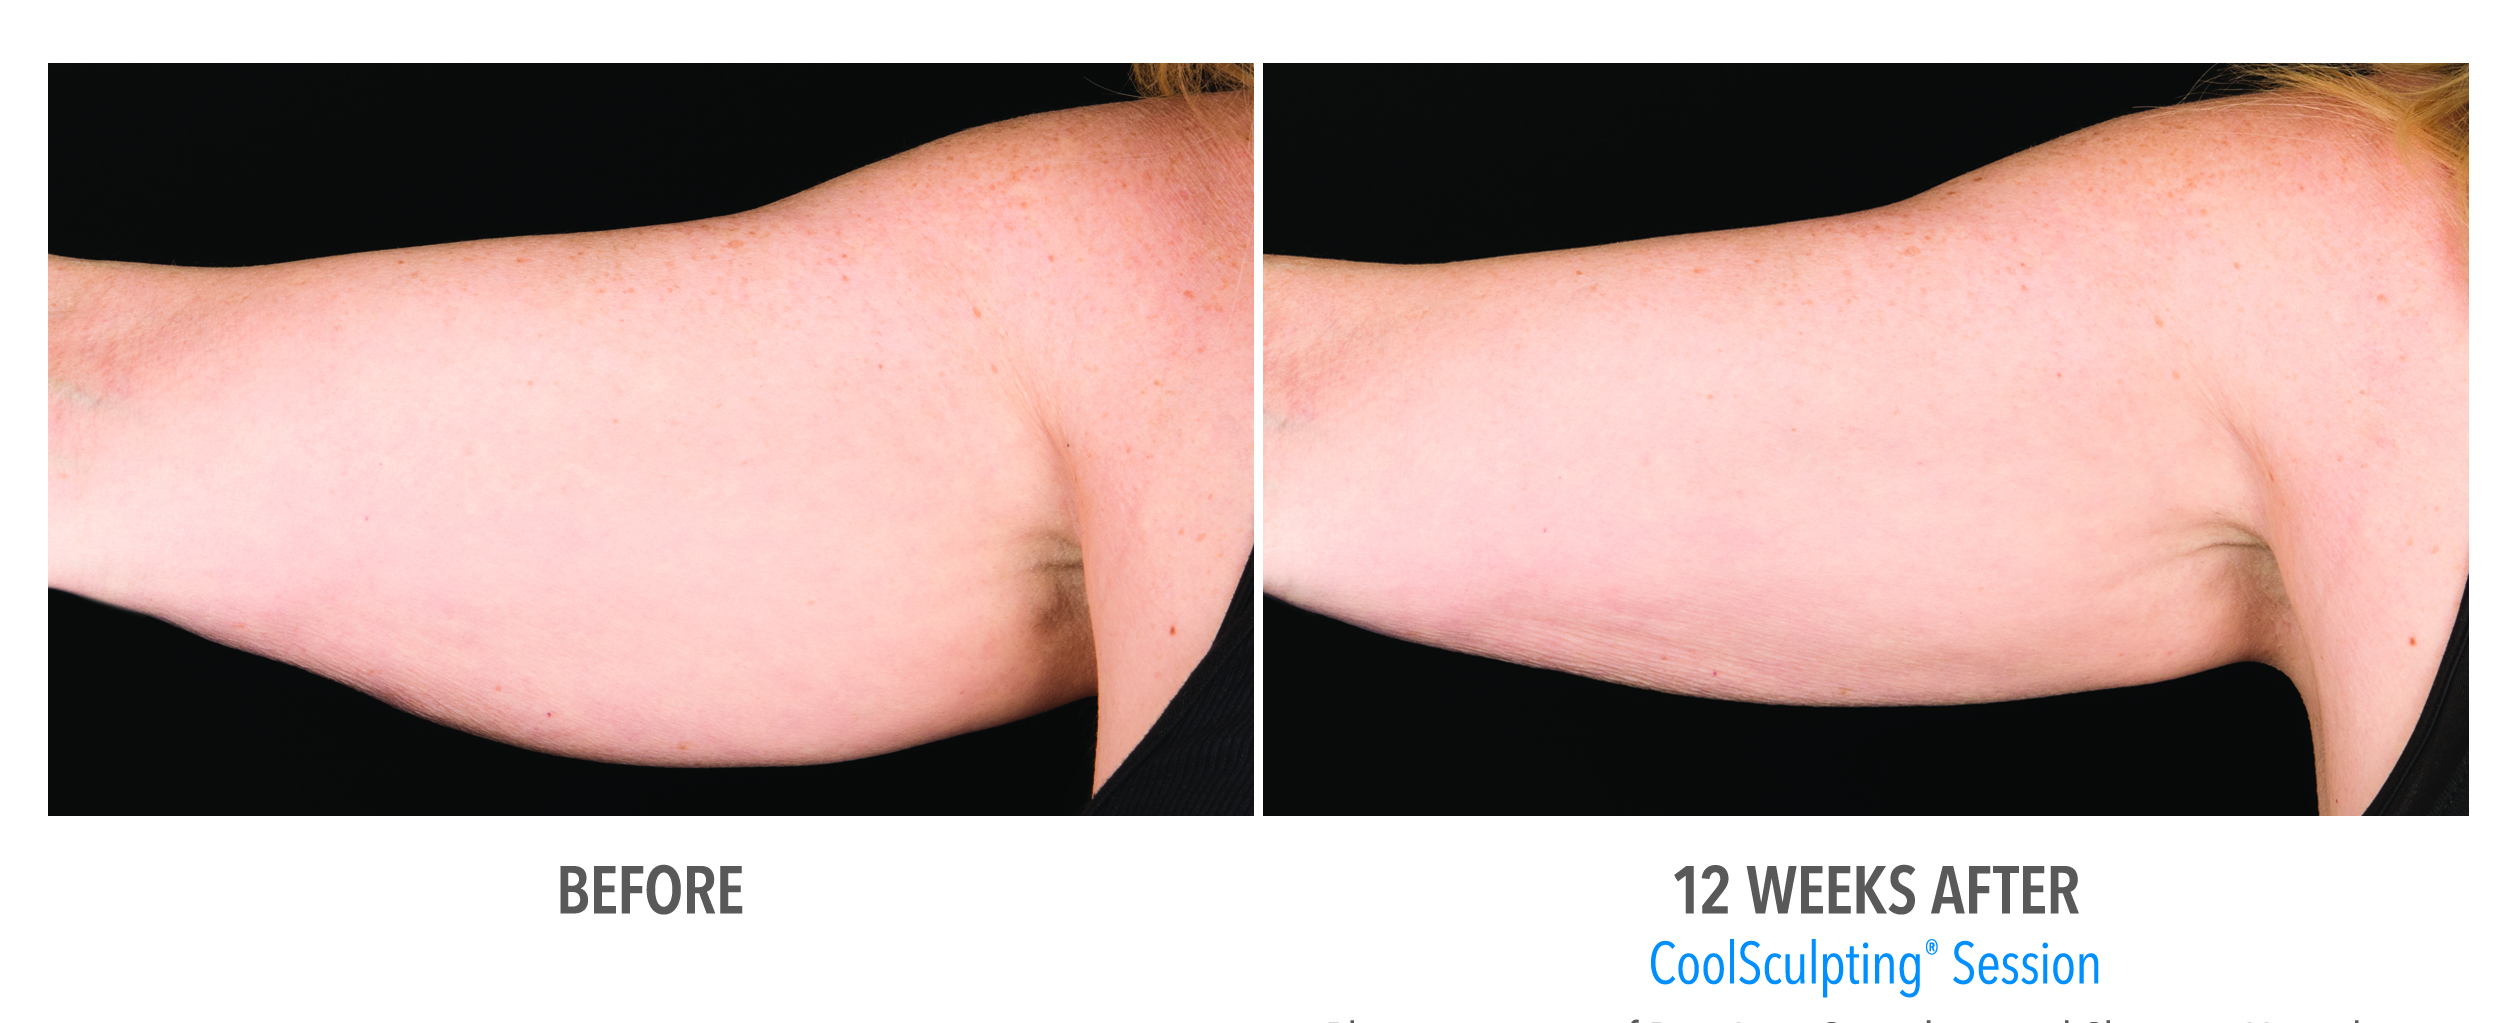 https://www.laser-aesthetic-center.com/wp-content/uploads/2017/09/coolsculpting-for-arms-before-and-after.jpg